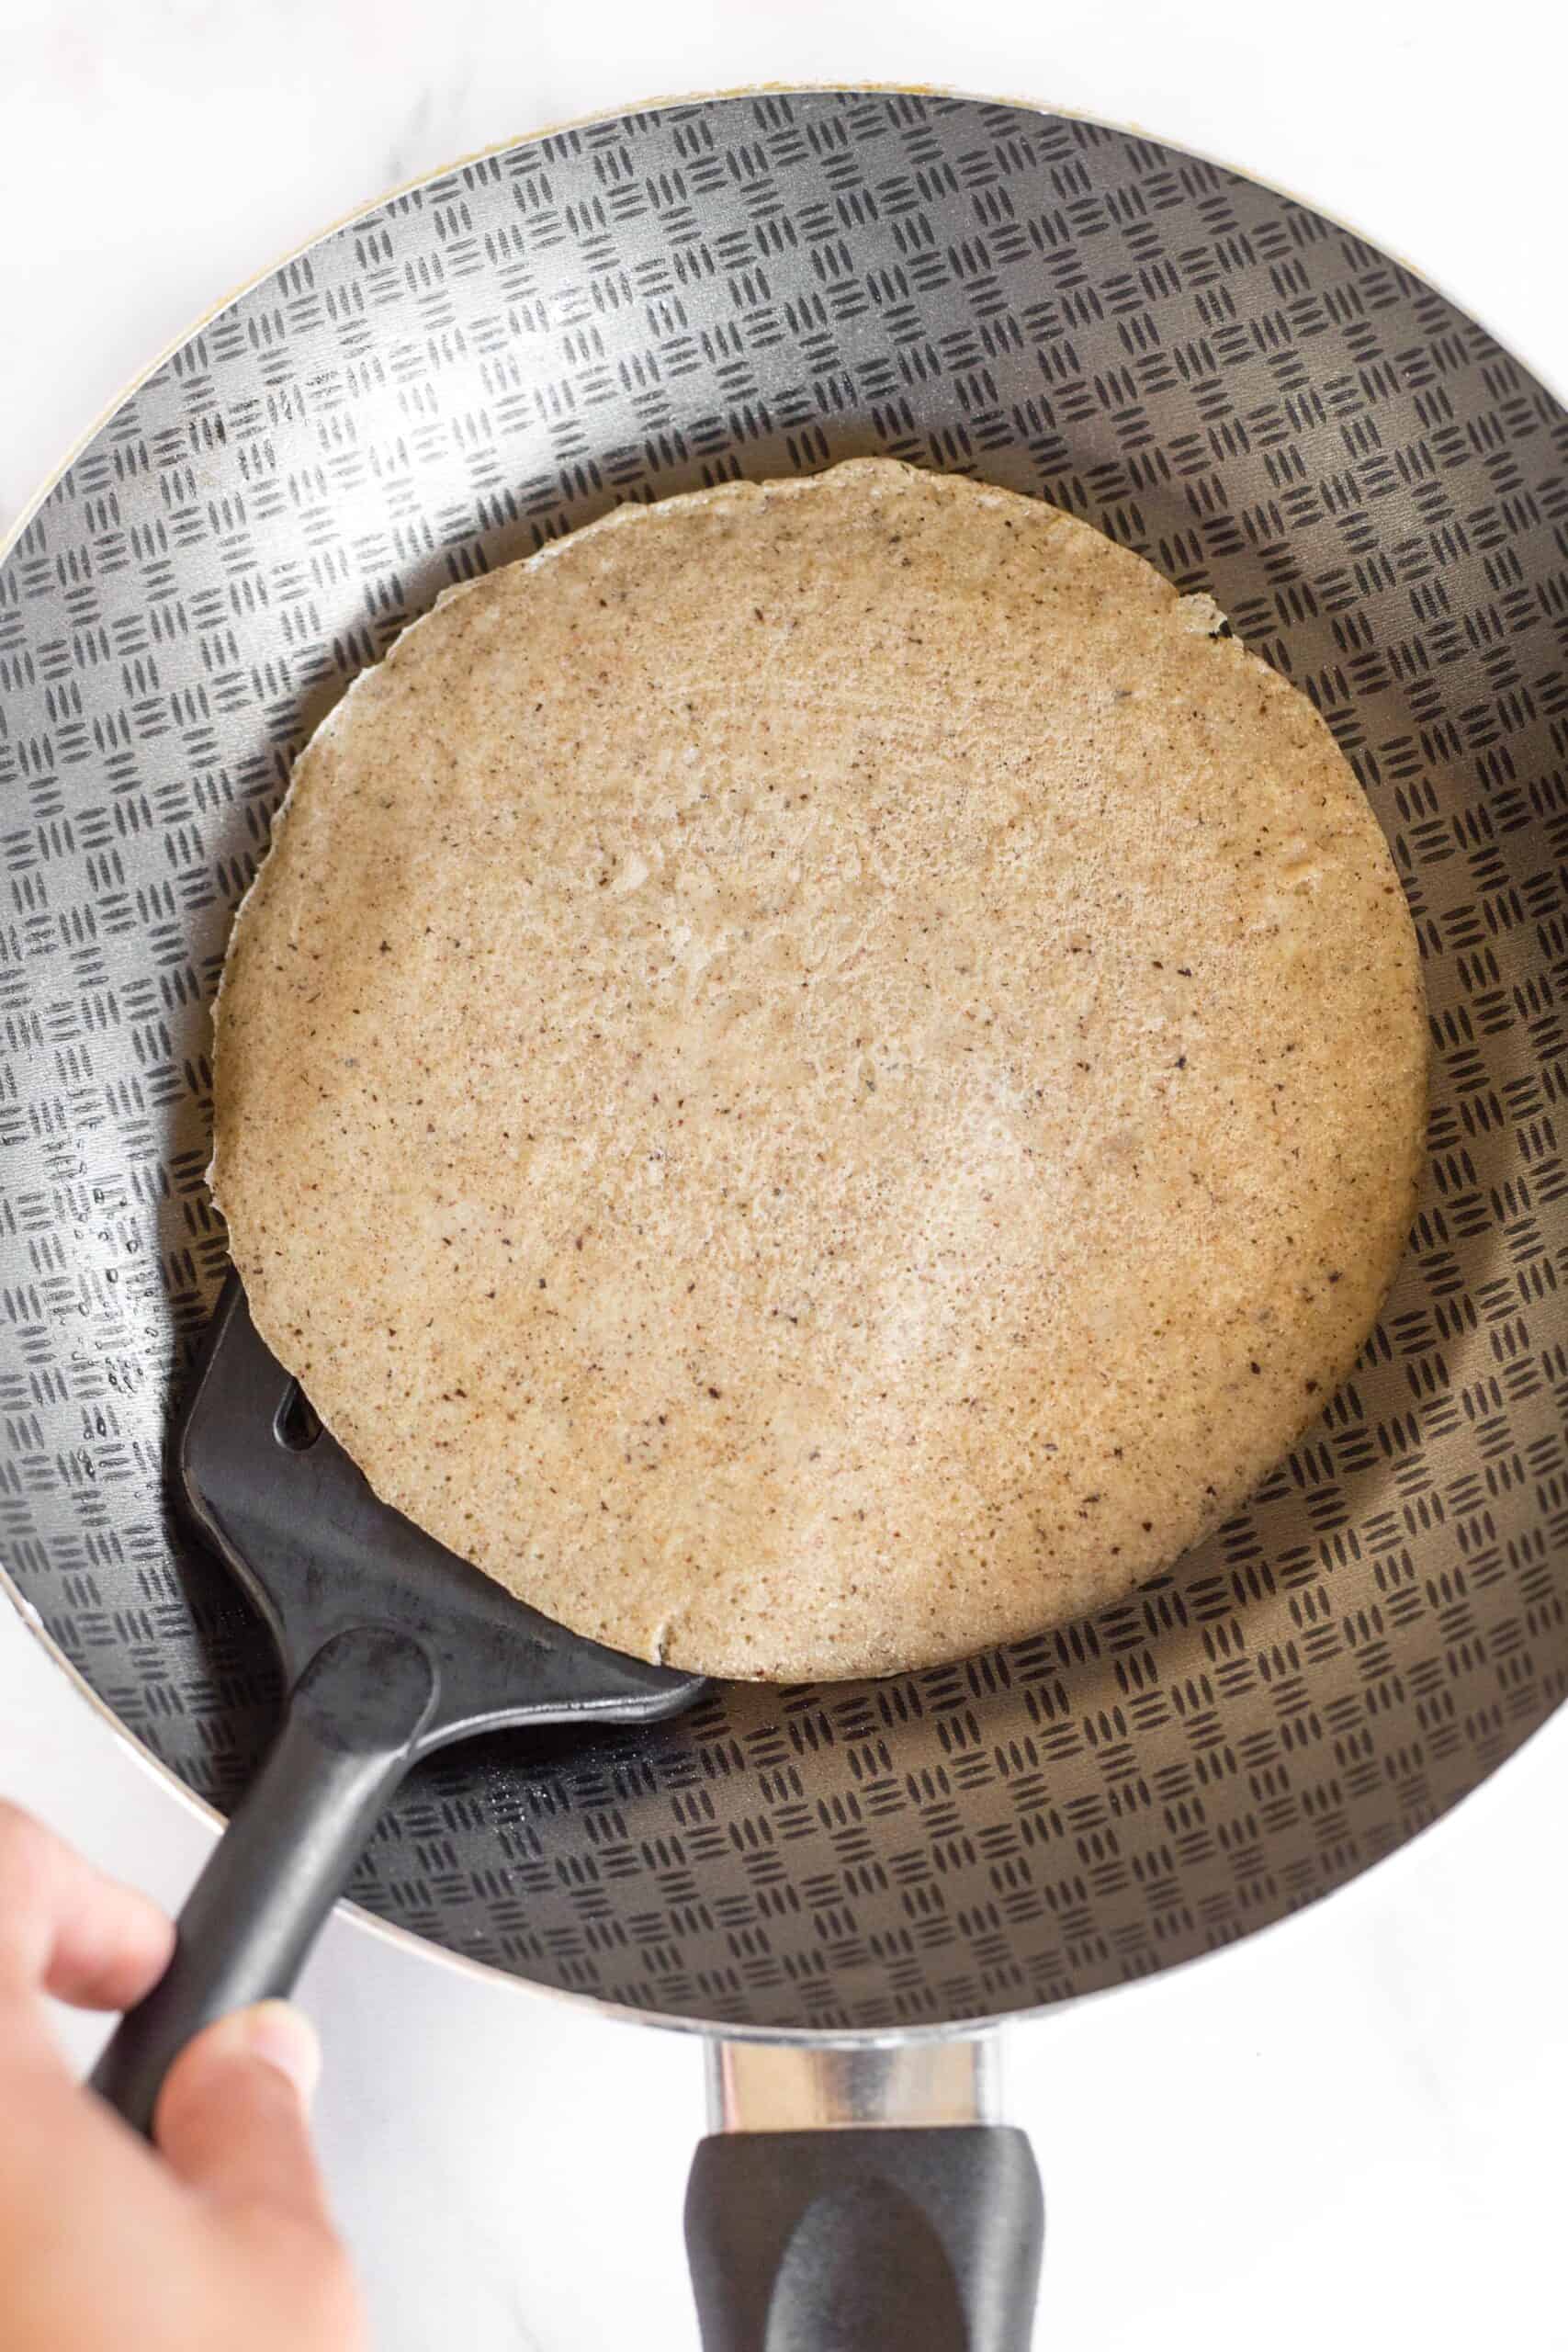 Using a spatula to lift up a cooked buckwheat crepe from a skillet.